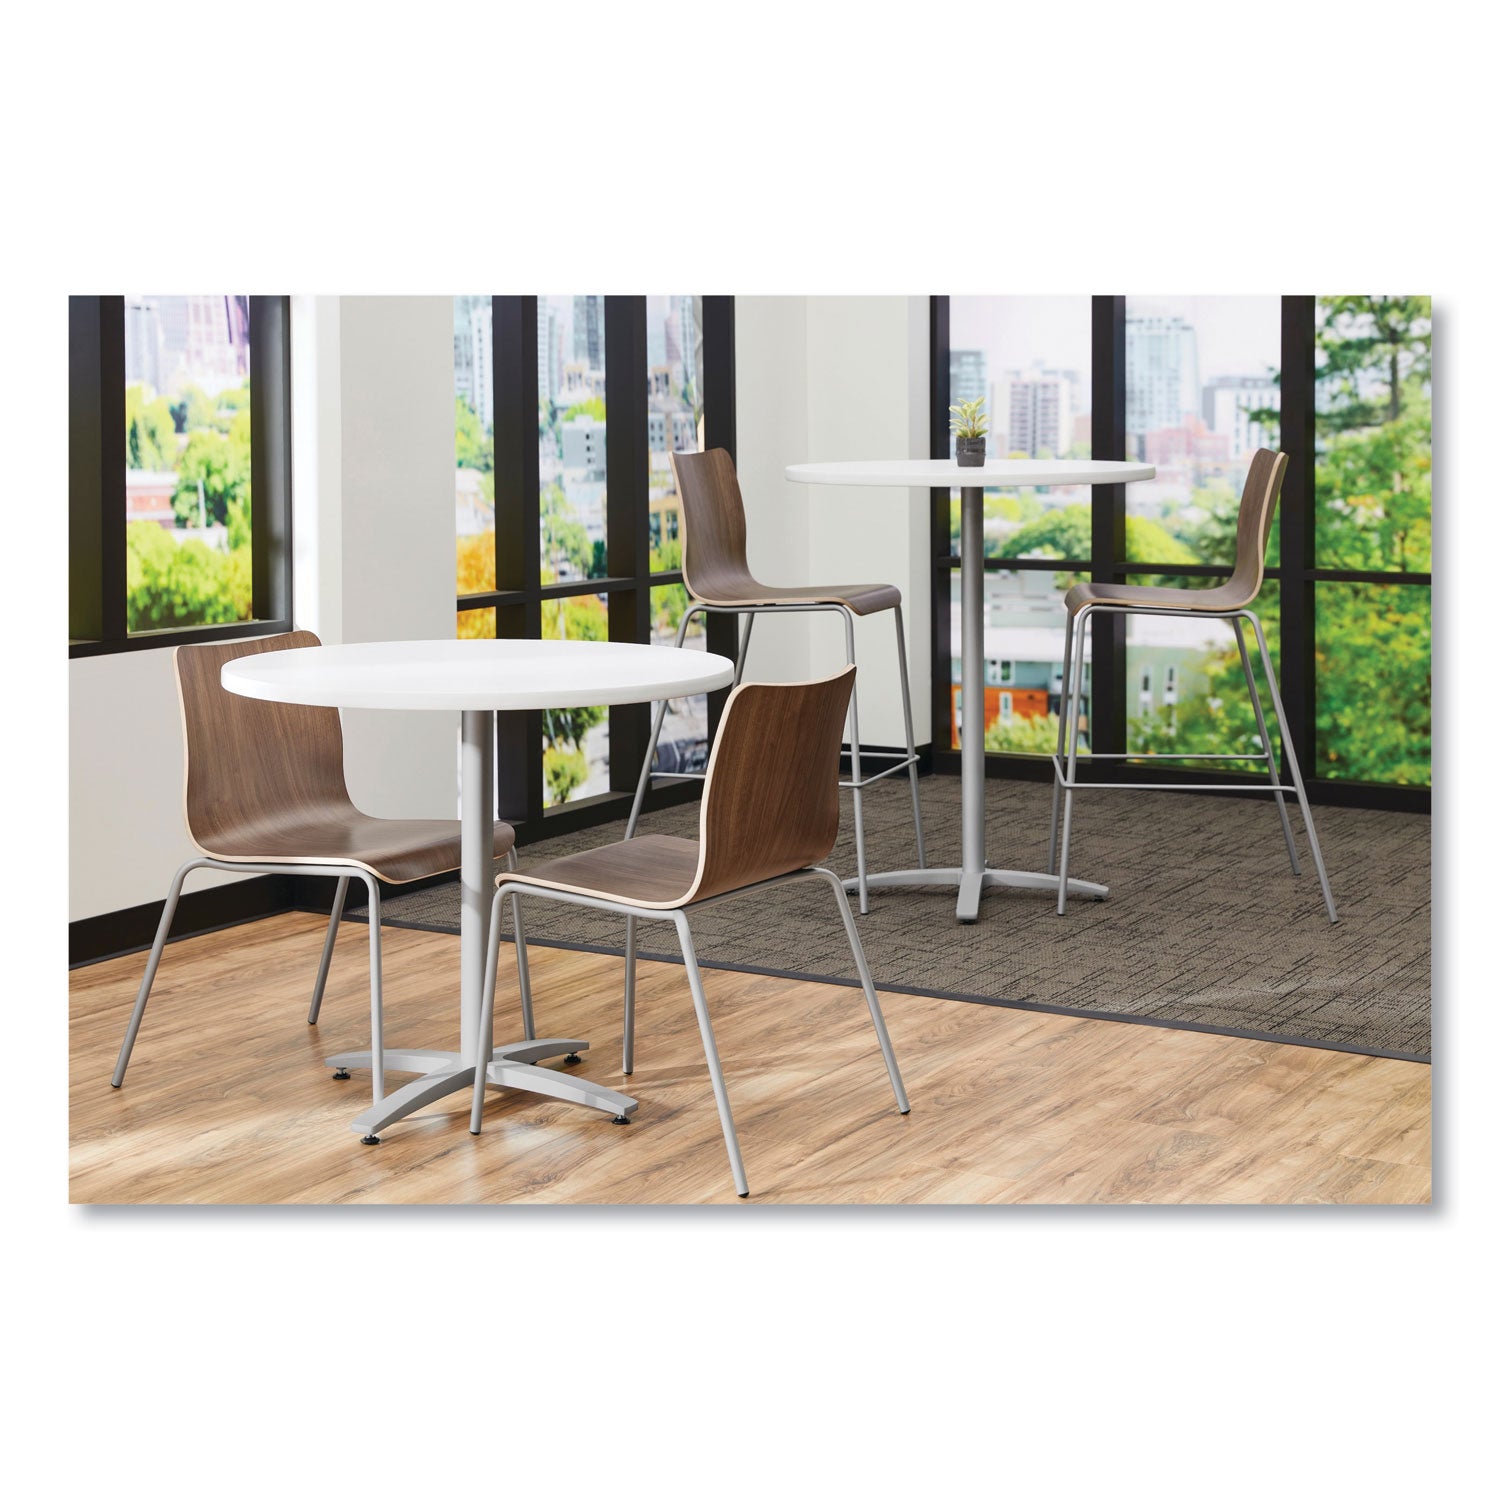 ruck-laminate-chair-supports-up-to-300-lb-18-seat-height-pinnacle-seat-back-silver-base_honruck1lpincp8 - 4